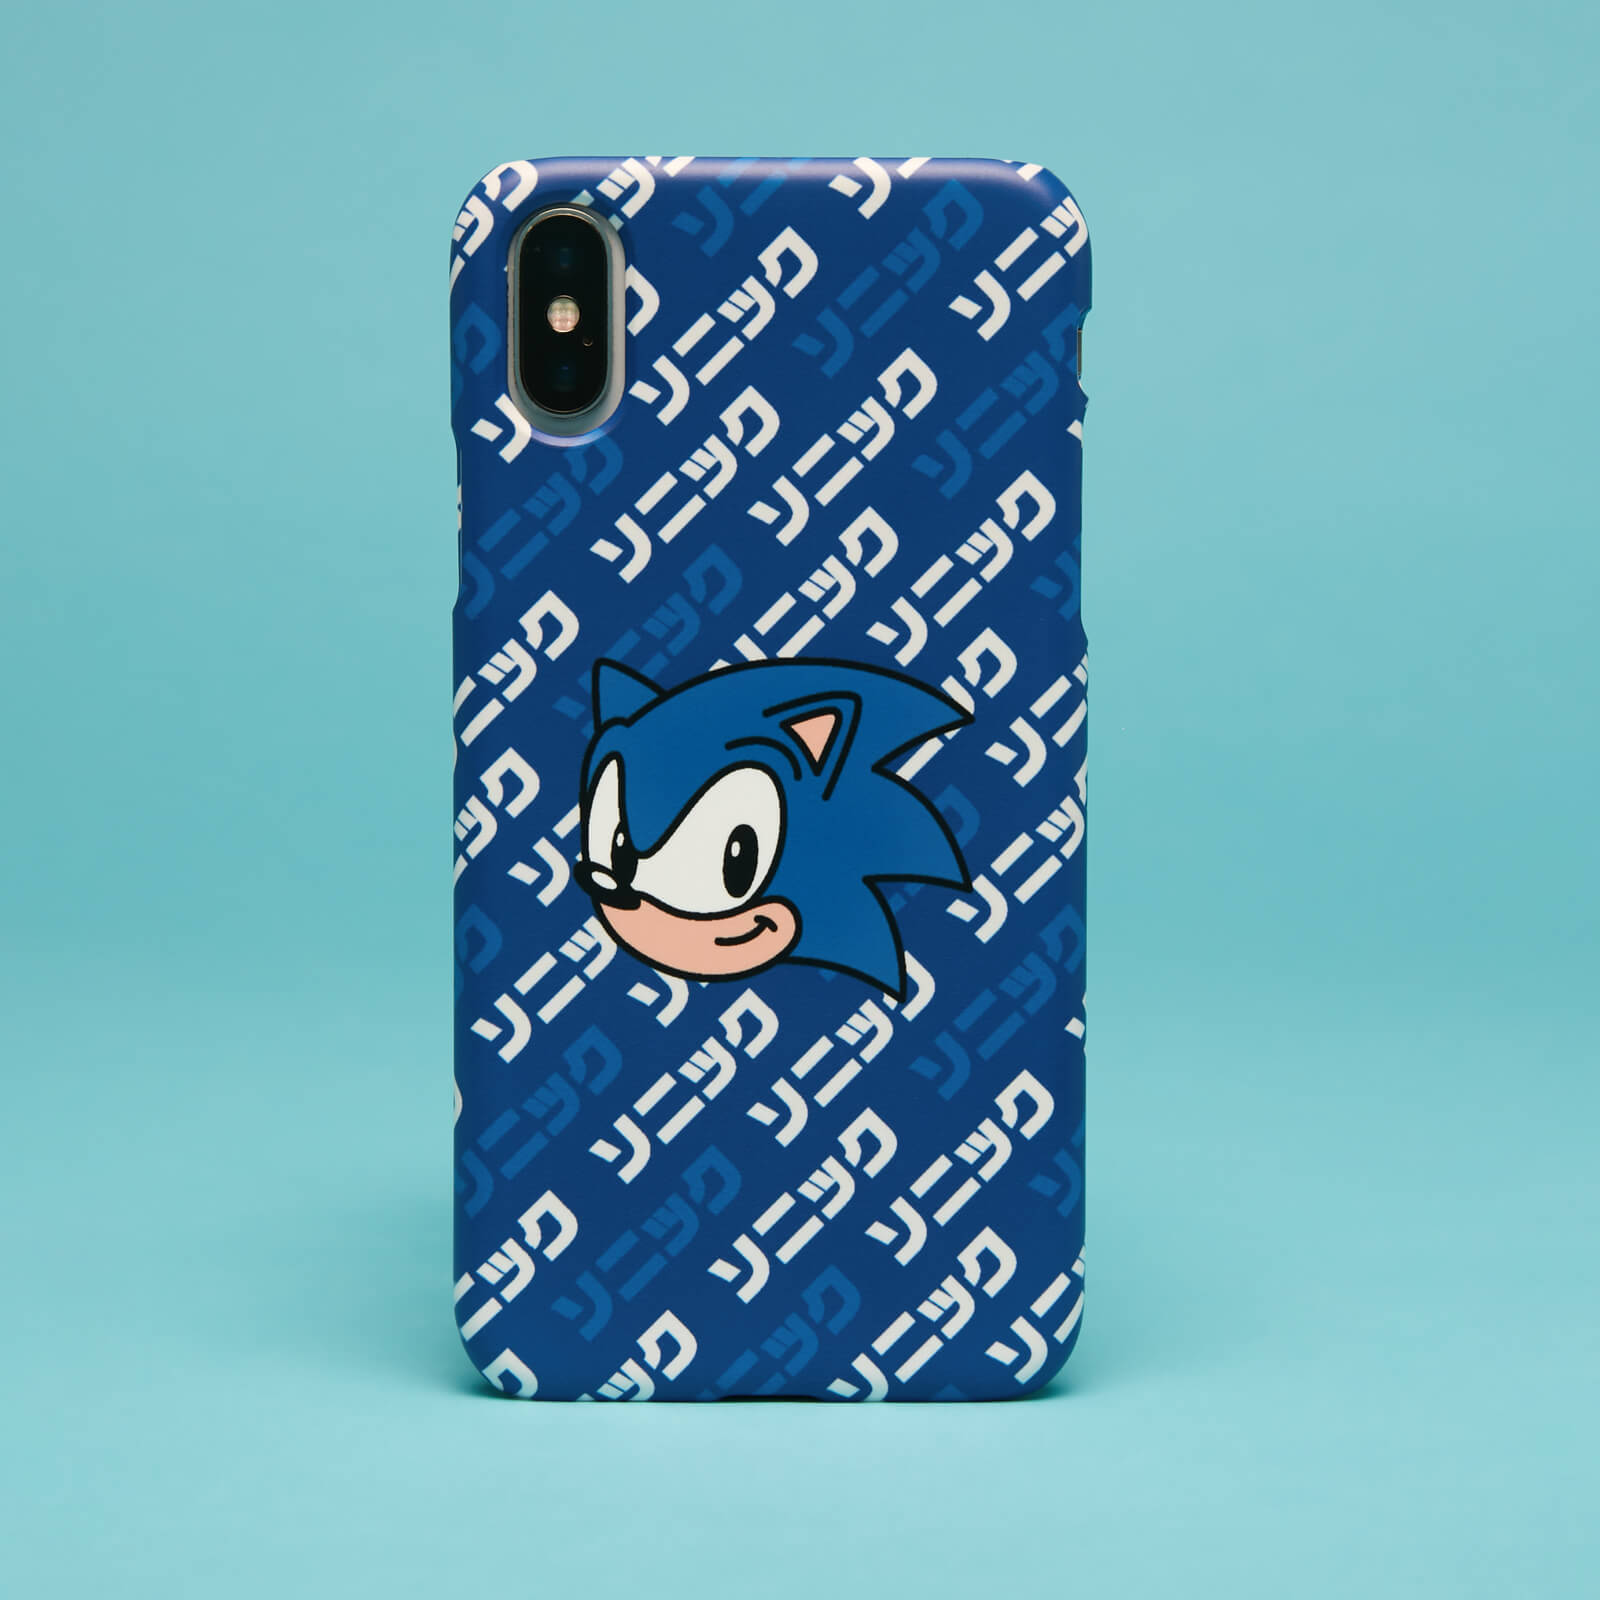 SEGA Sonic Kanji Phone Case for iPhone and Android - iPhone 5C - Snap Case - Matte